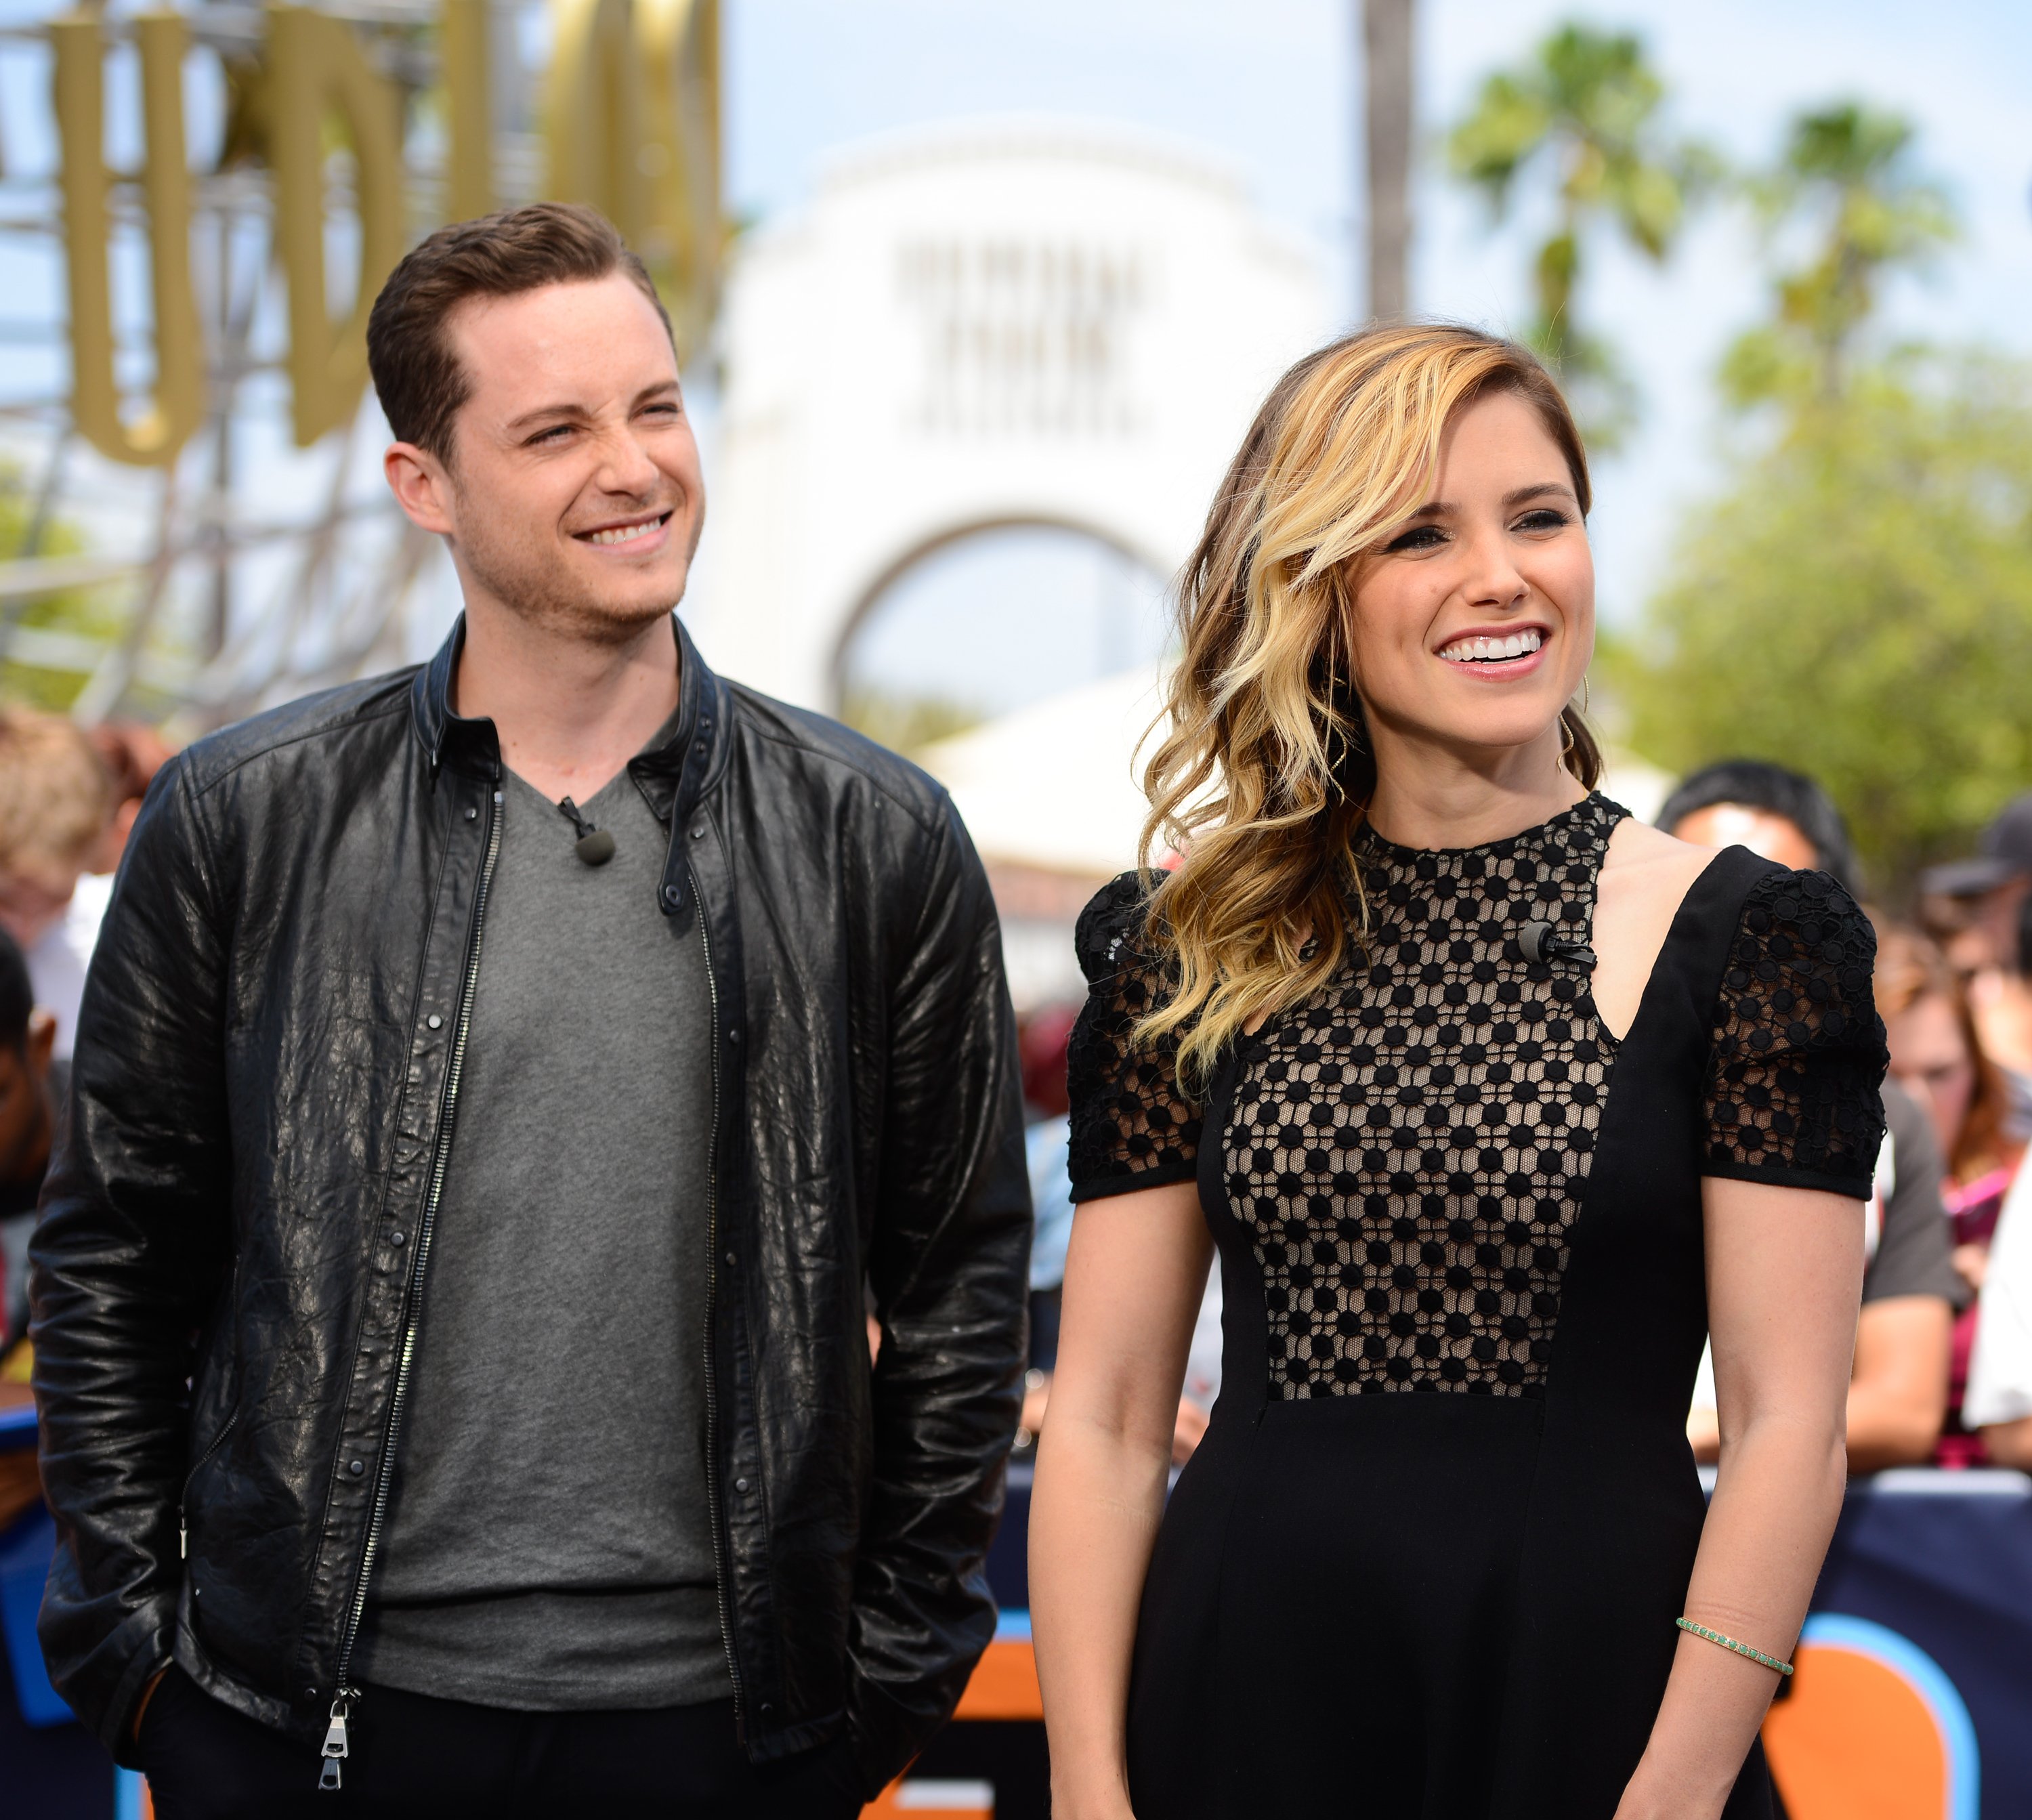 Jesse Soffer and Sophia Bush at "Extra" on May 19, 2014, in Universal City, California. | Source: Getty Images